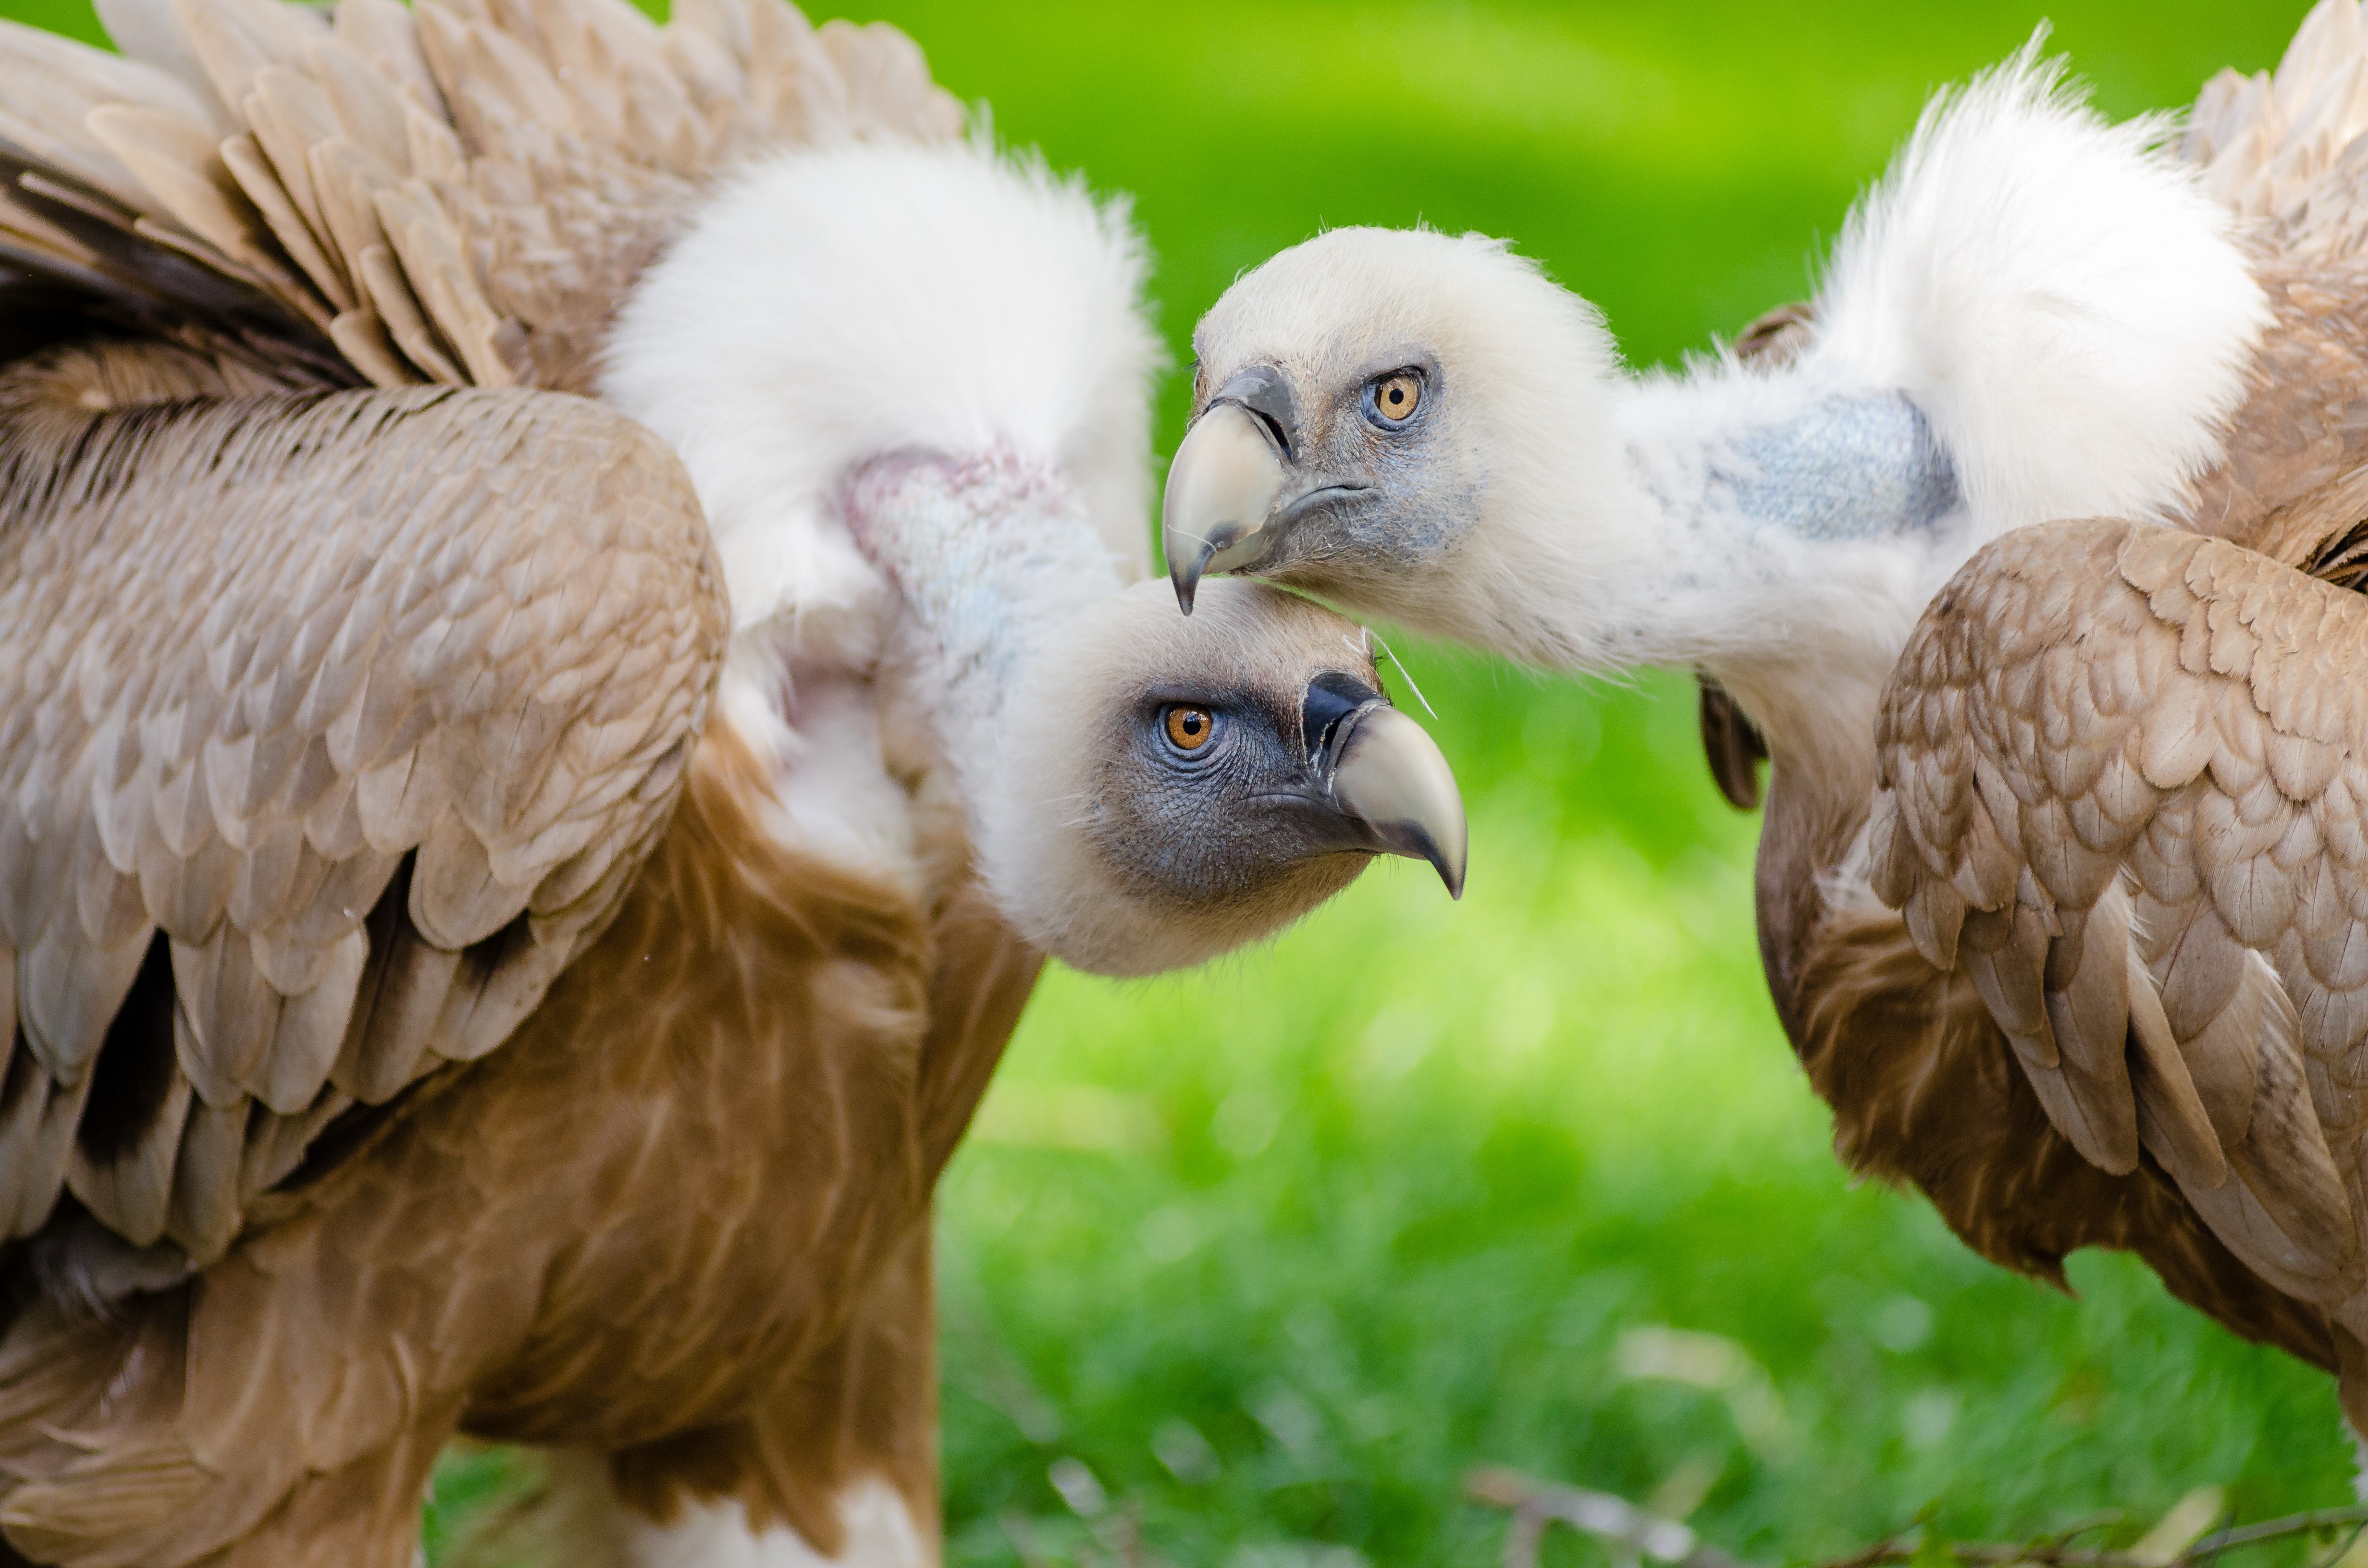 About Vultures